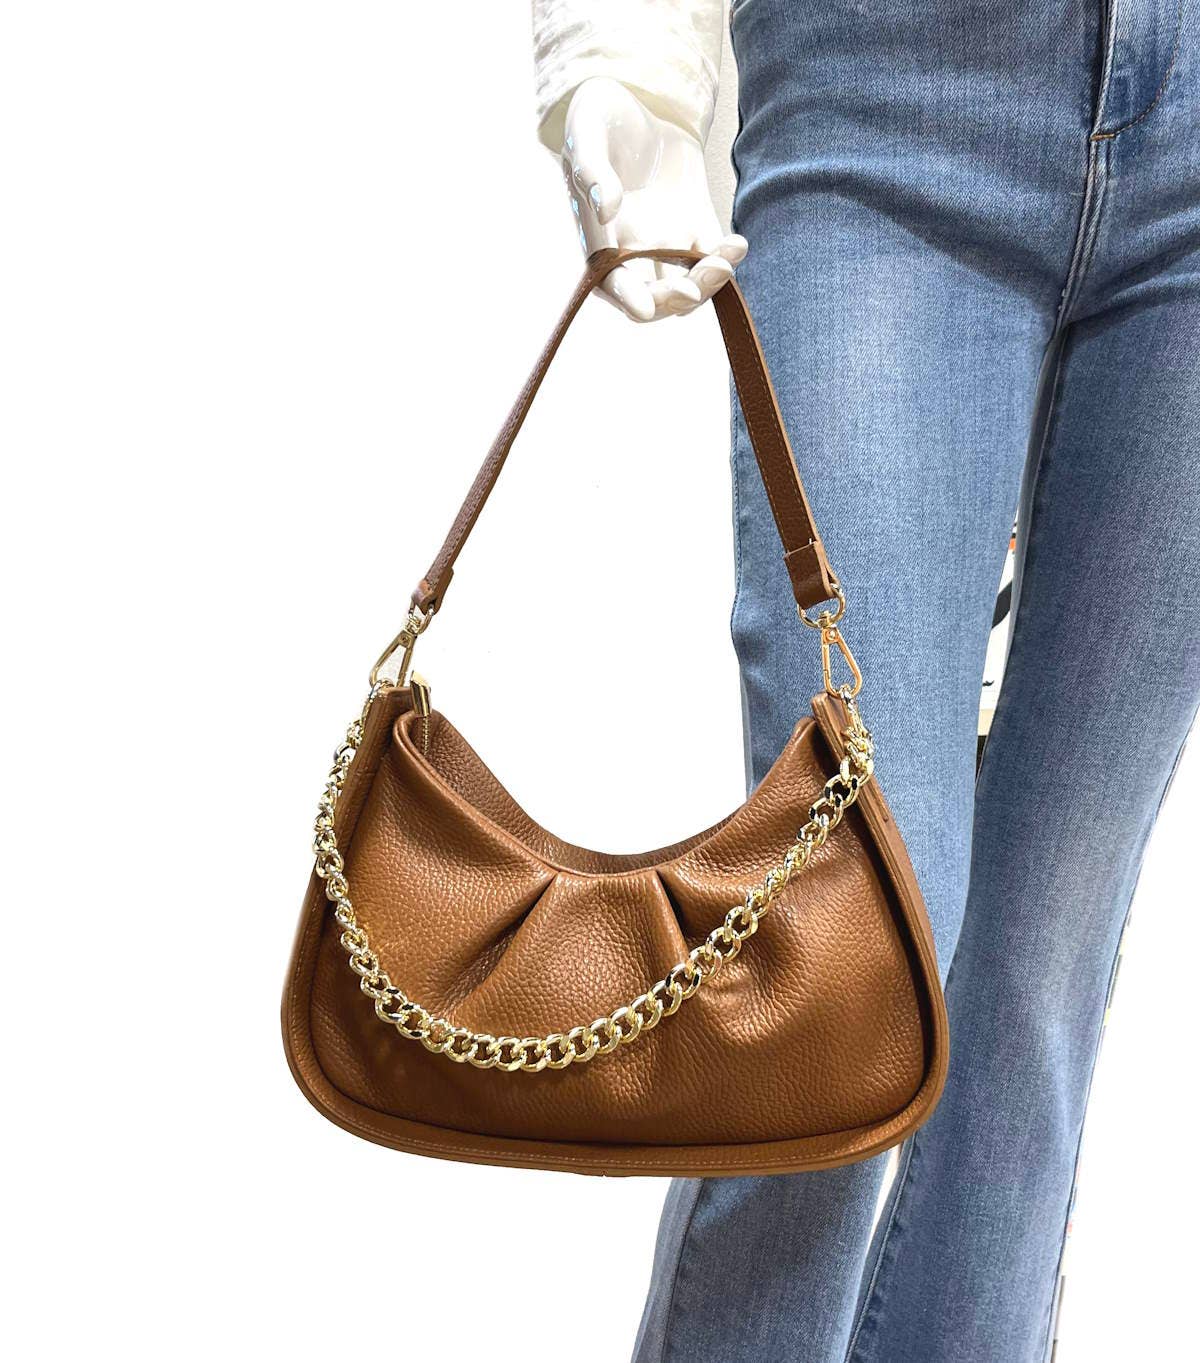 Suie Valentini Brown Leather Bag with Gold Chain Accent - Simple Good